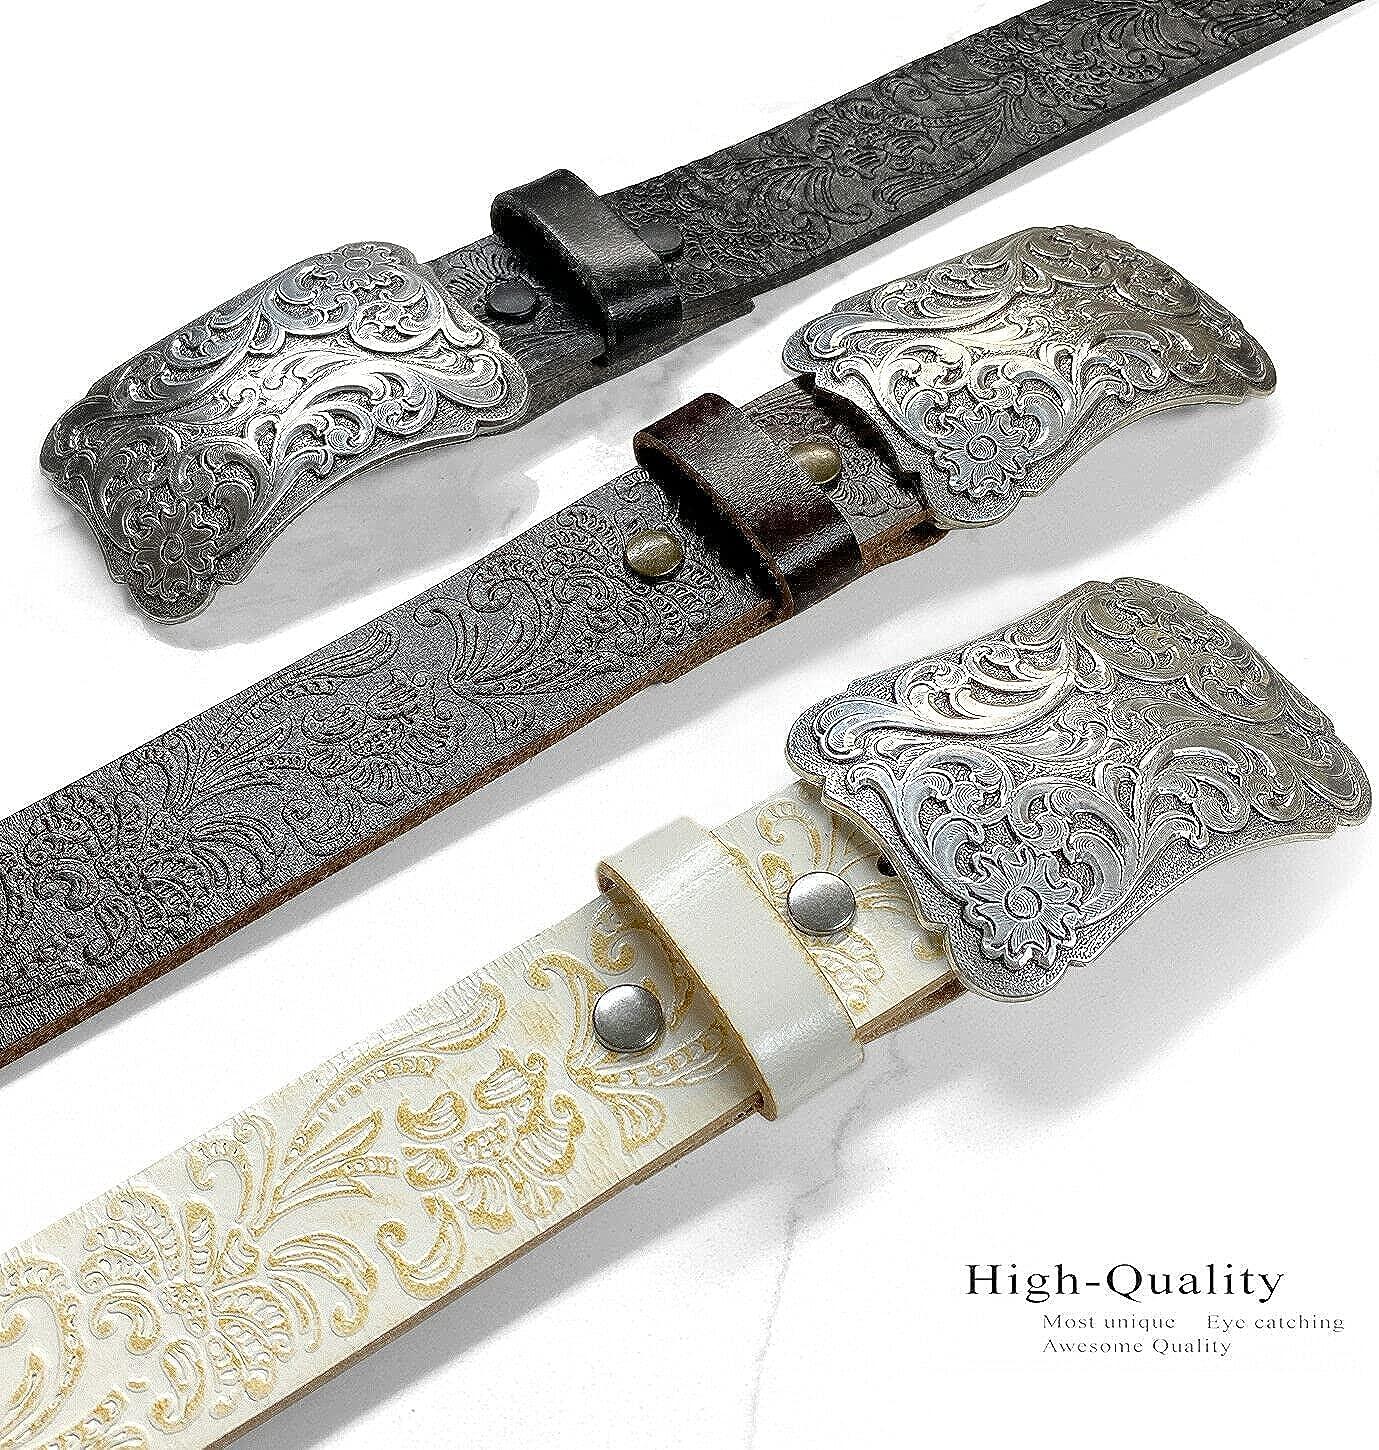 Western Fashion Style Floral Engraved Buckle Full Grain Genuine Leather  Belt 1-1/2 (38mm) Wide - Assembled in the U.S 38 Type B Black